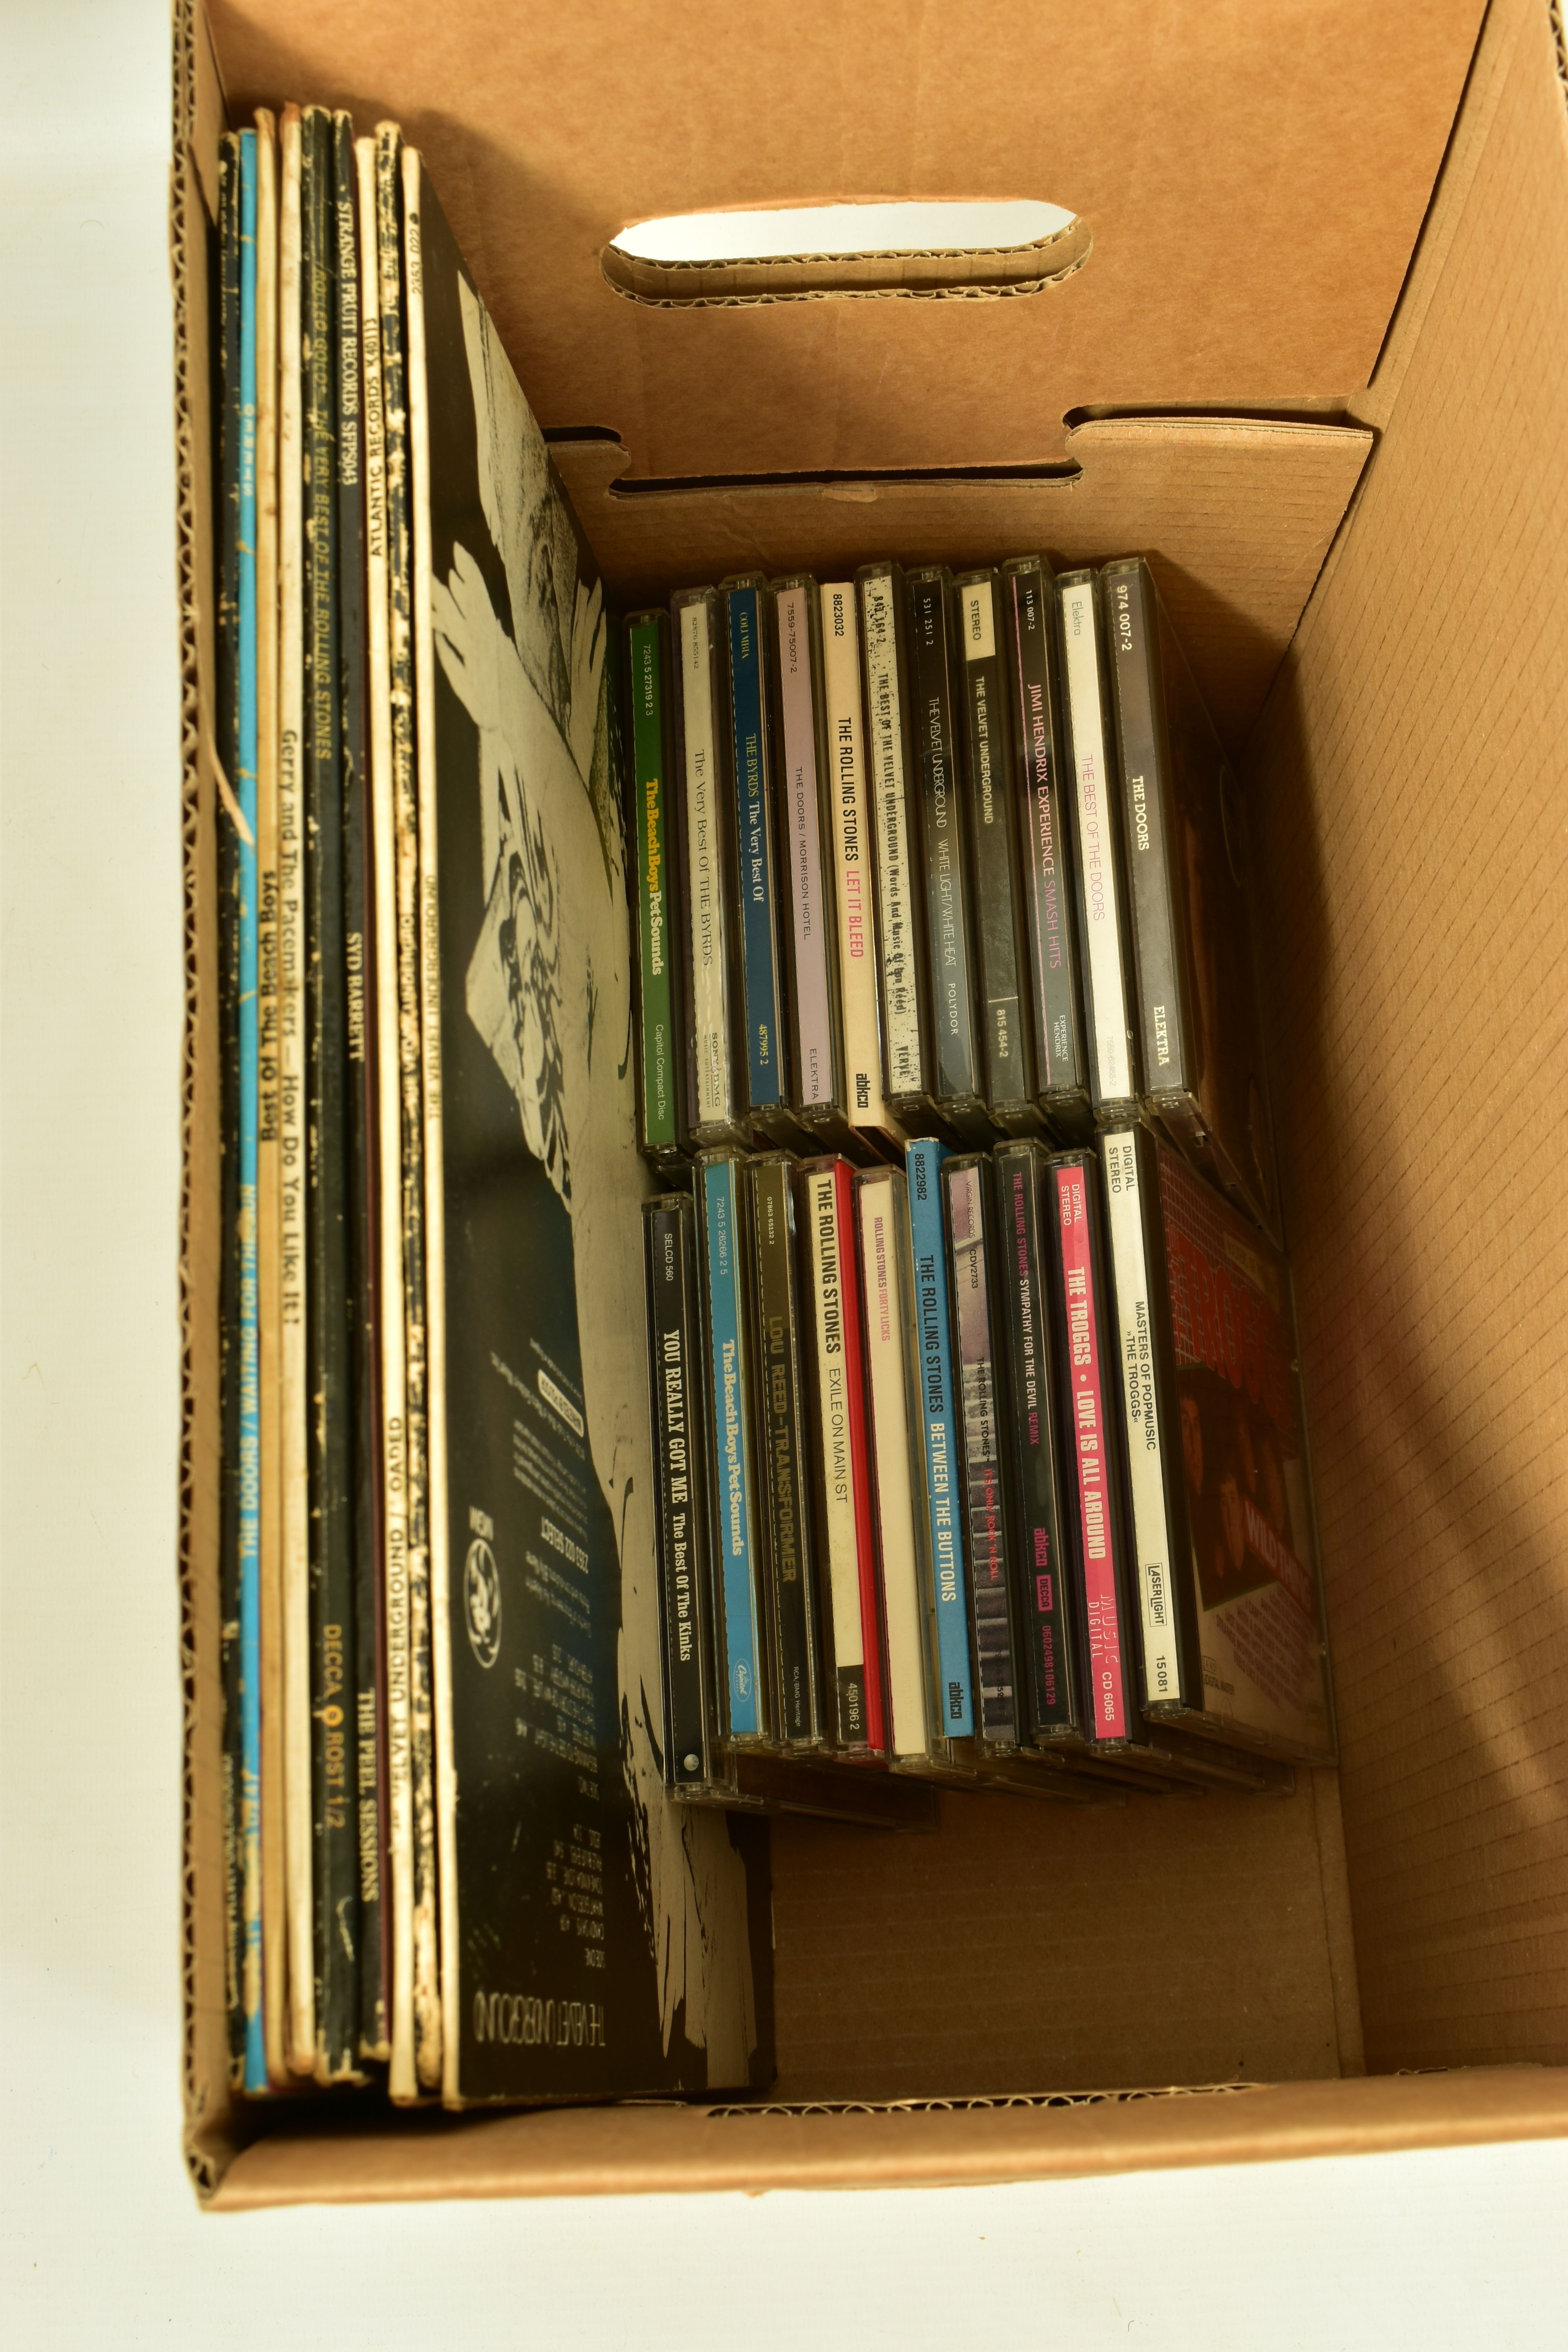 TEN LPs AND NINETEEN CDs OF 1960s MUSIC including The Rolling Sones, Velvet Underground, Gerry and